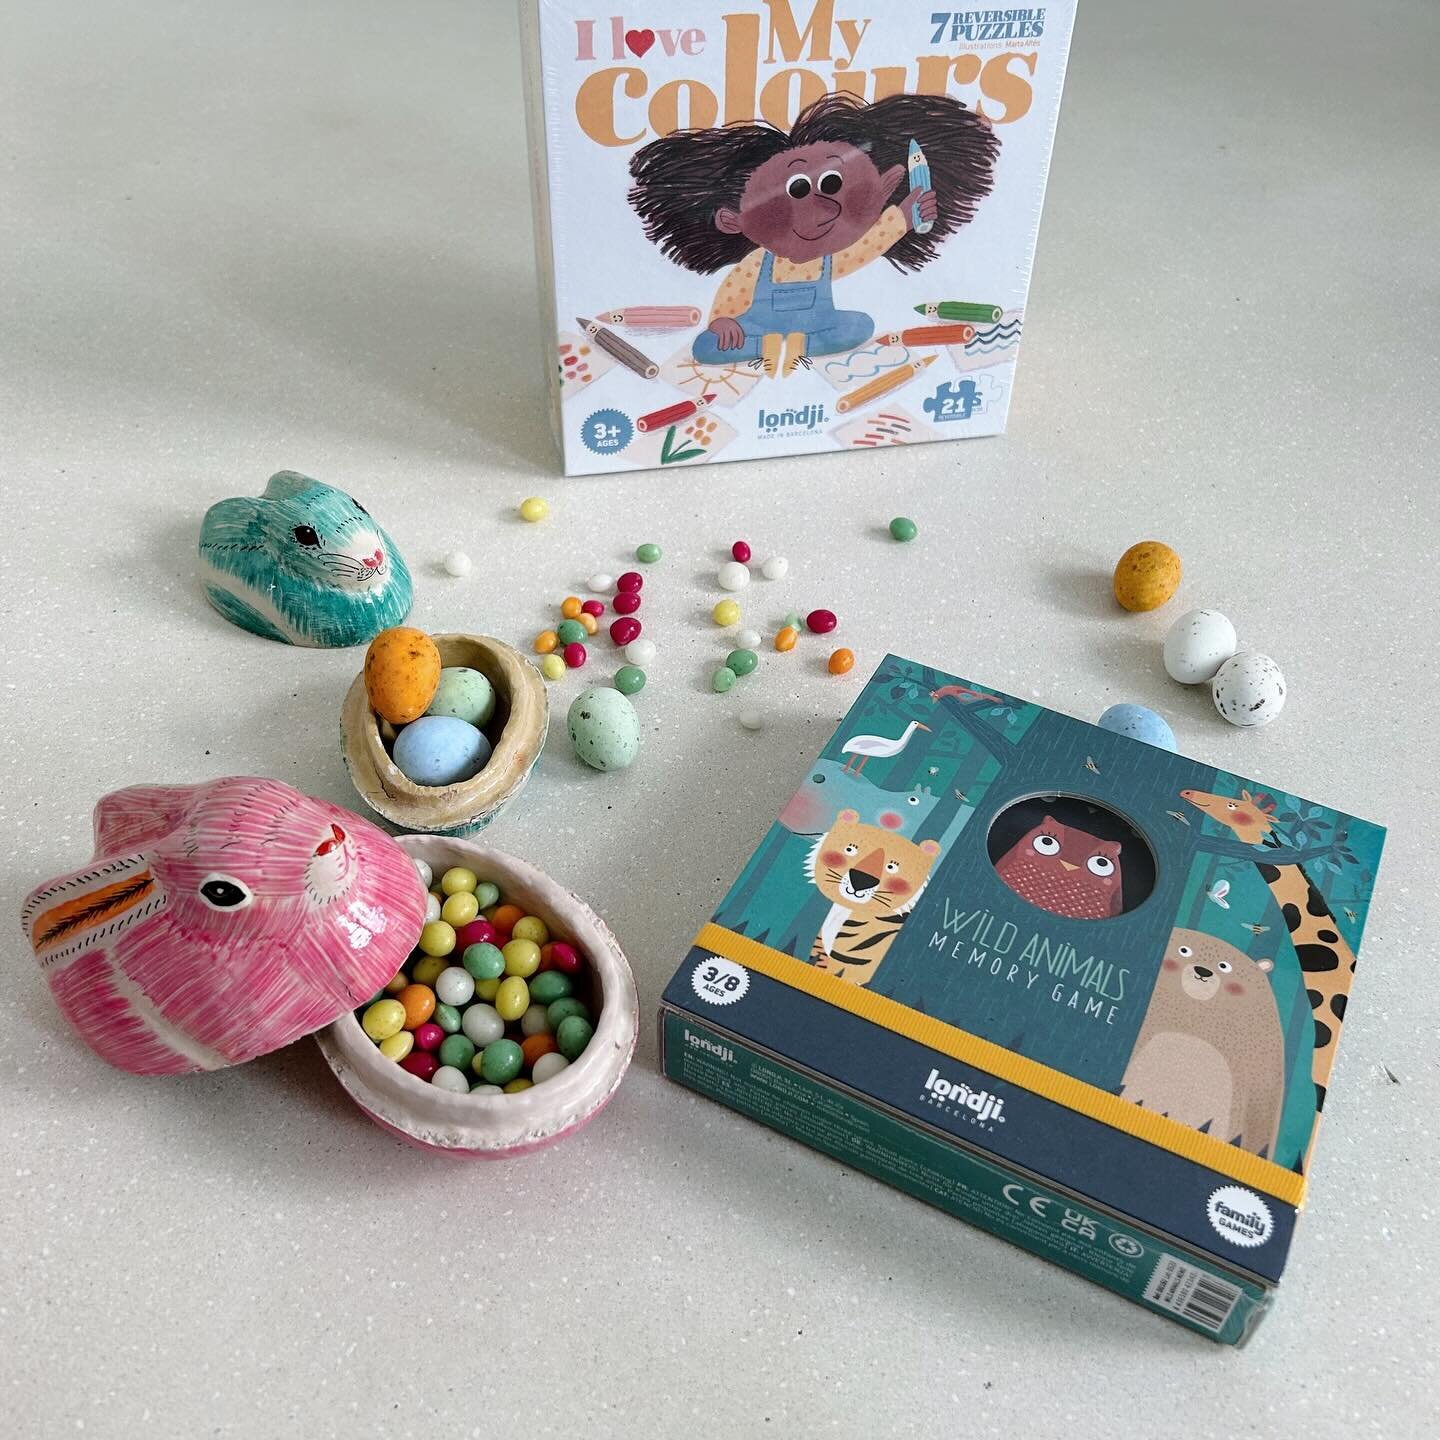 Easter countdown 🐰✨ find some last minute - affordable - gifts in our &ldquo;toys &amp; gifts&rdquo; section and have your gifts delivered on time 🥚🧡🌼 

Enjoy the Easter eggs hunt this weekend 🙌🏻

#ottotiptotto #ottoilbassottostore #eastergifts